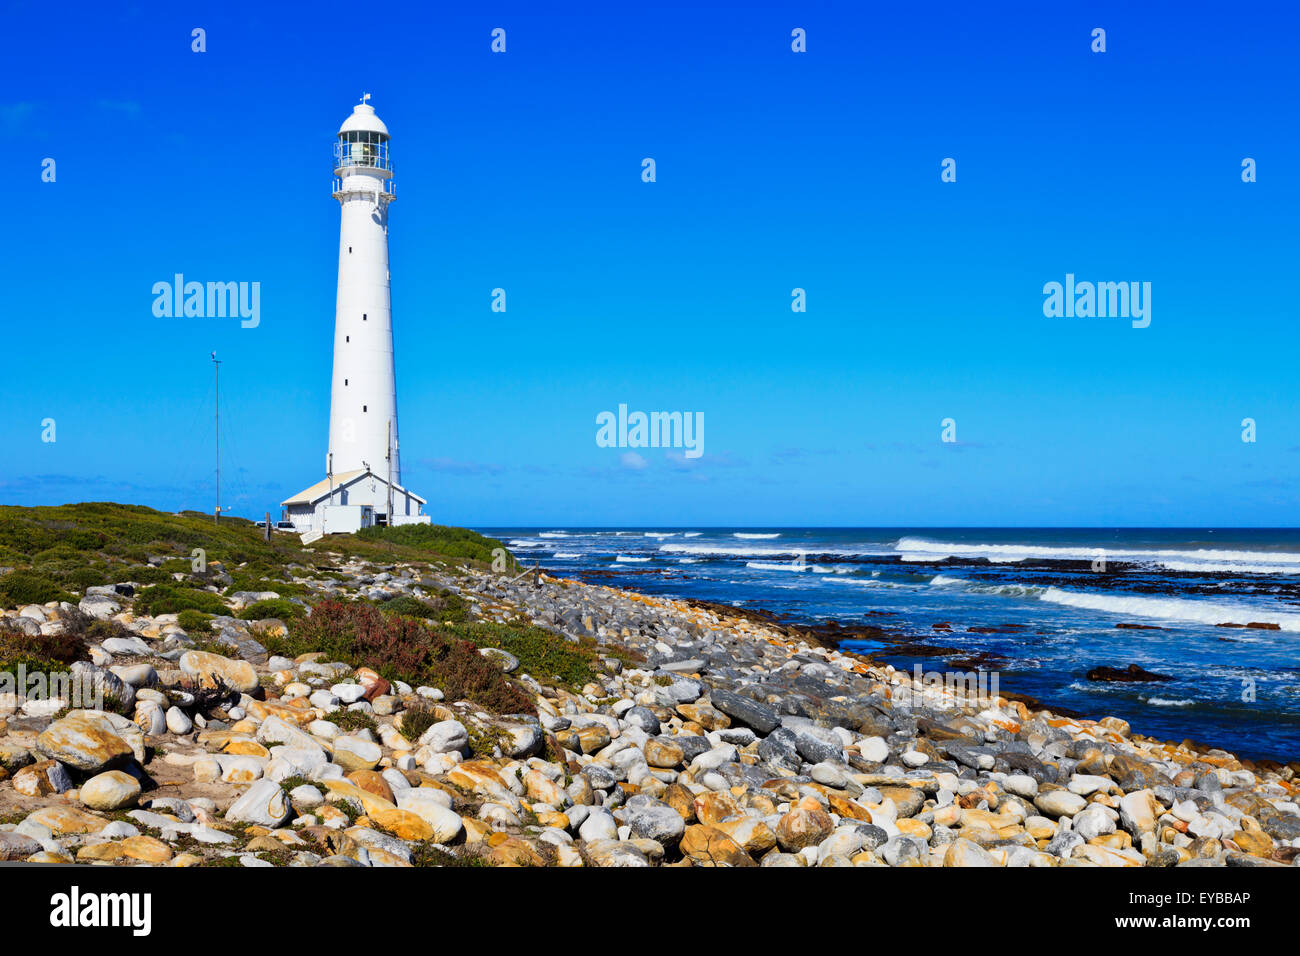 Kommetjie lighthouse, Western Cape Province South Africa Stock Photo